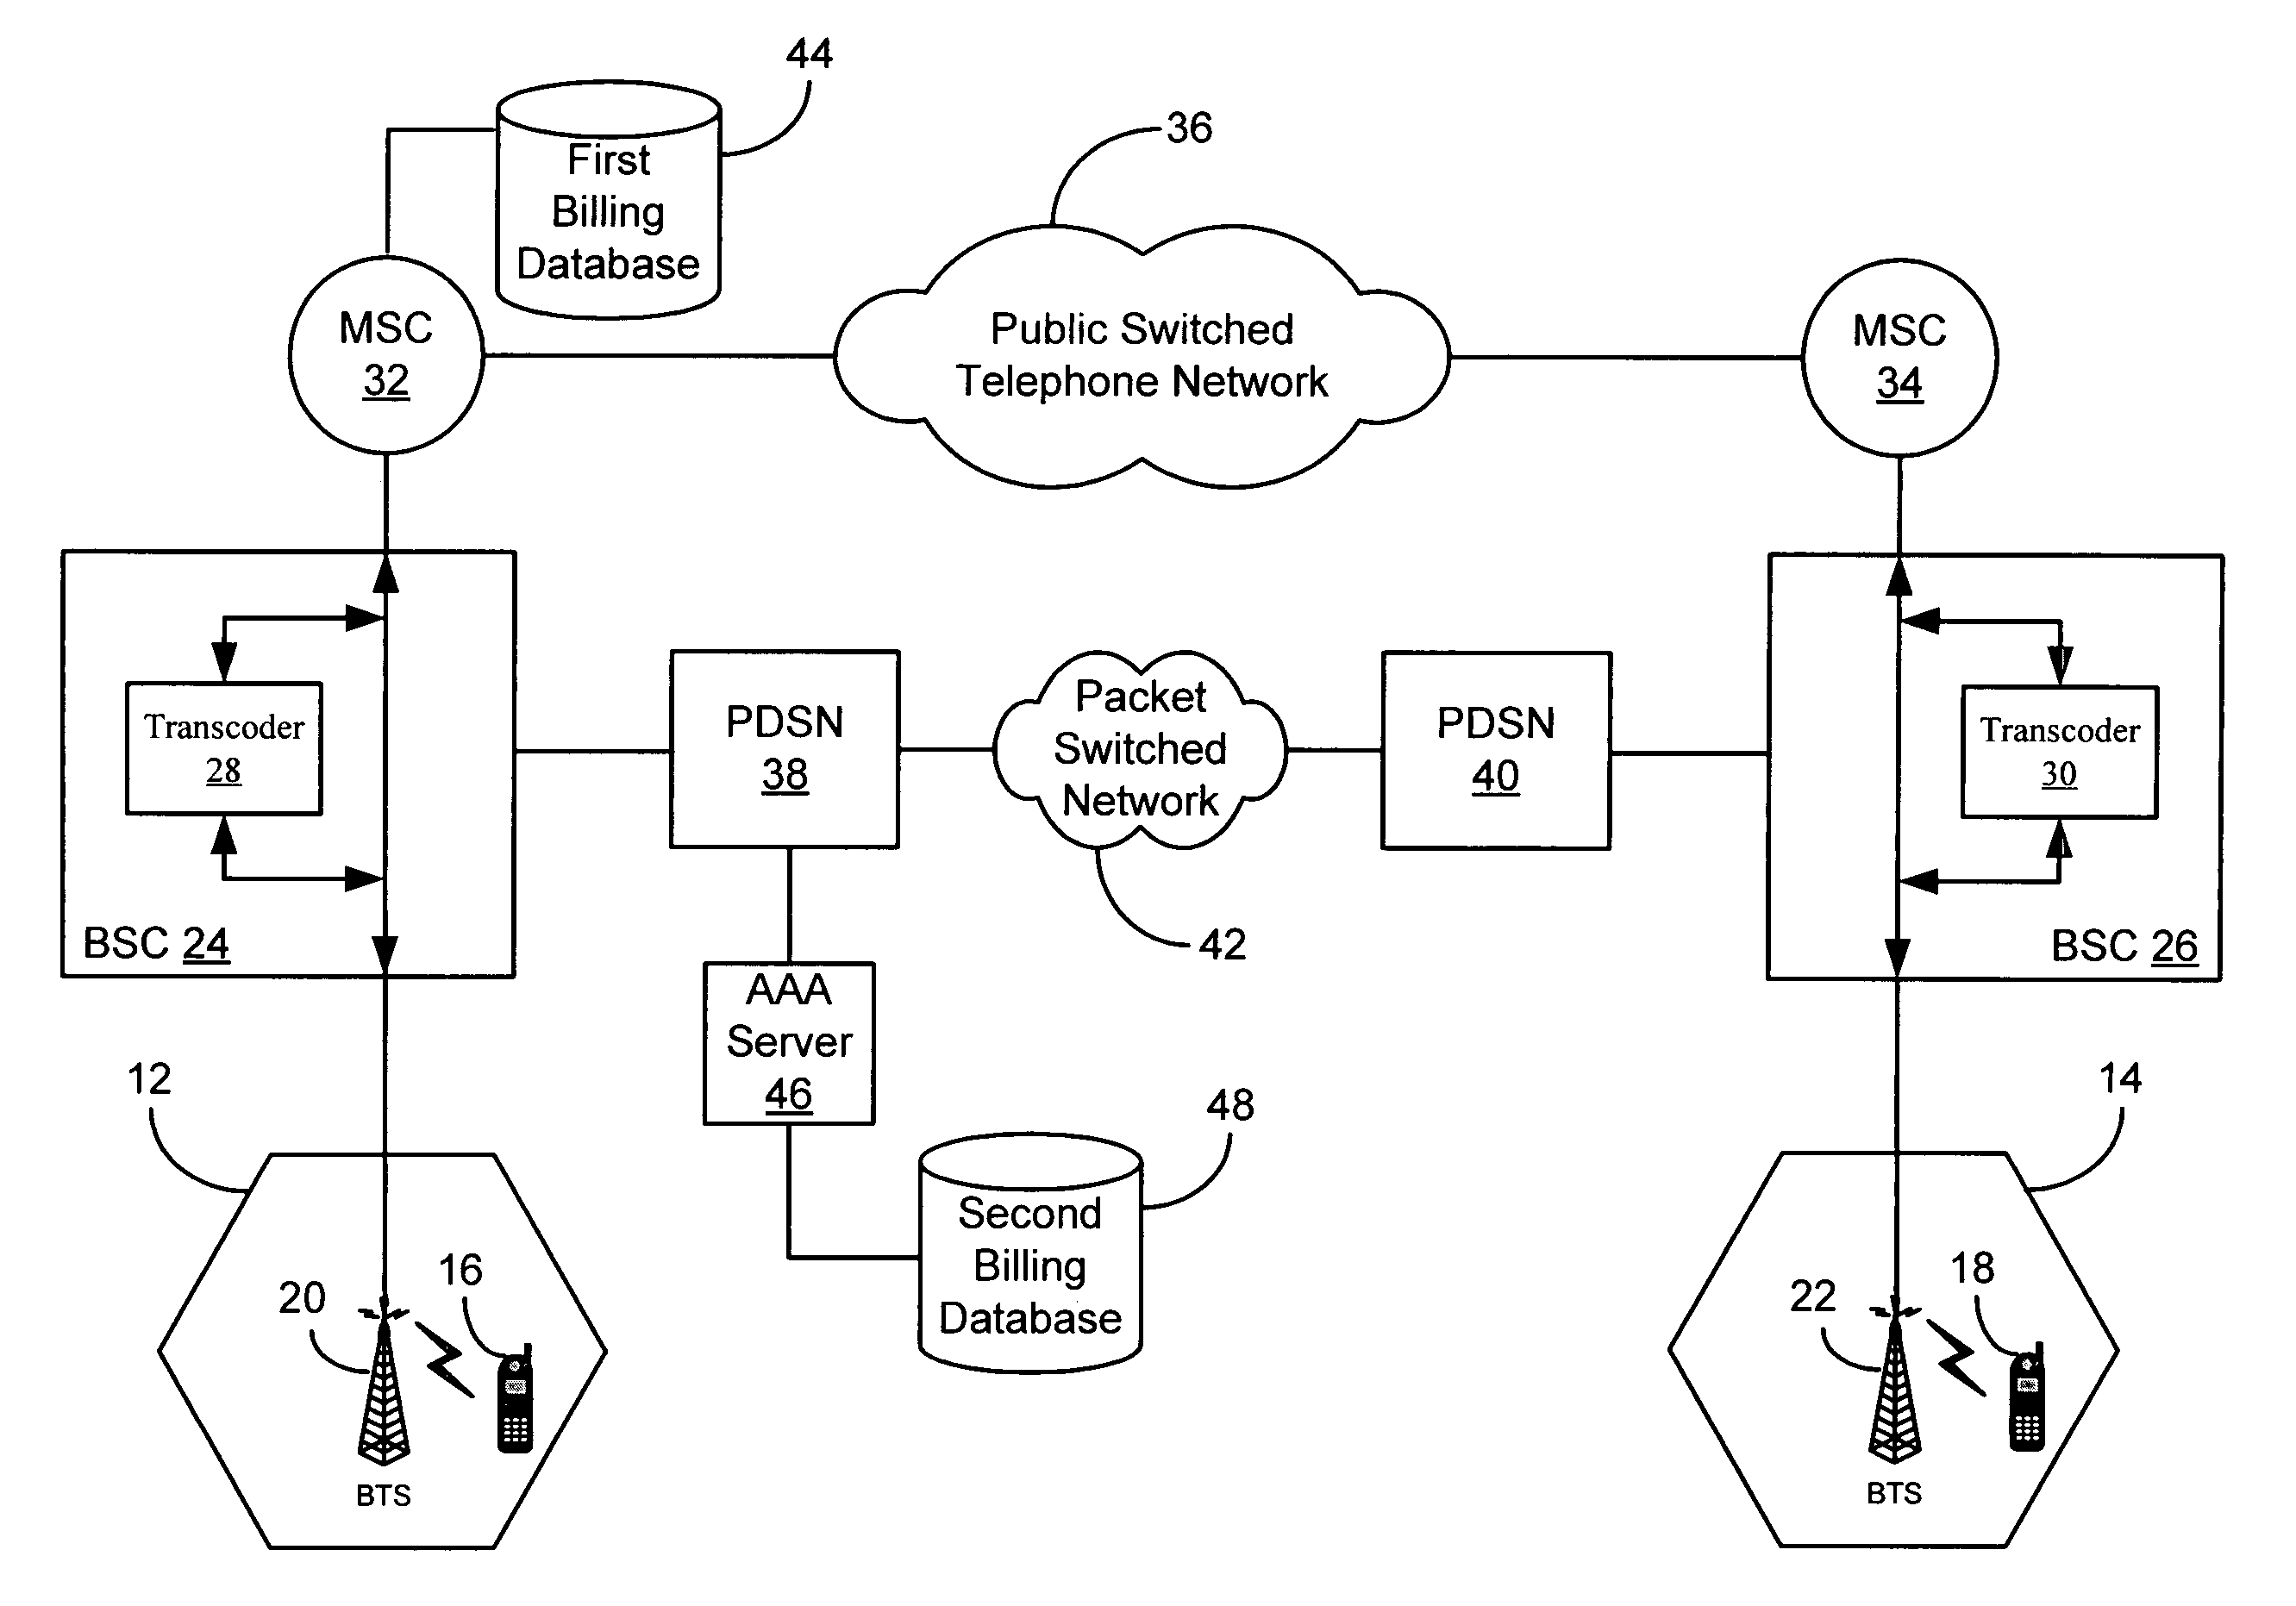 Method and system for tracking and billing vocoder bypass calls in a wireless wide area network